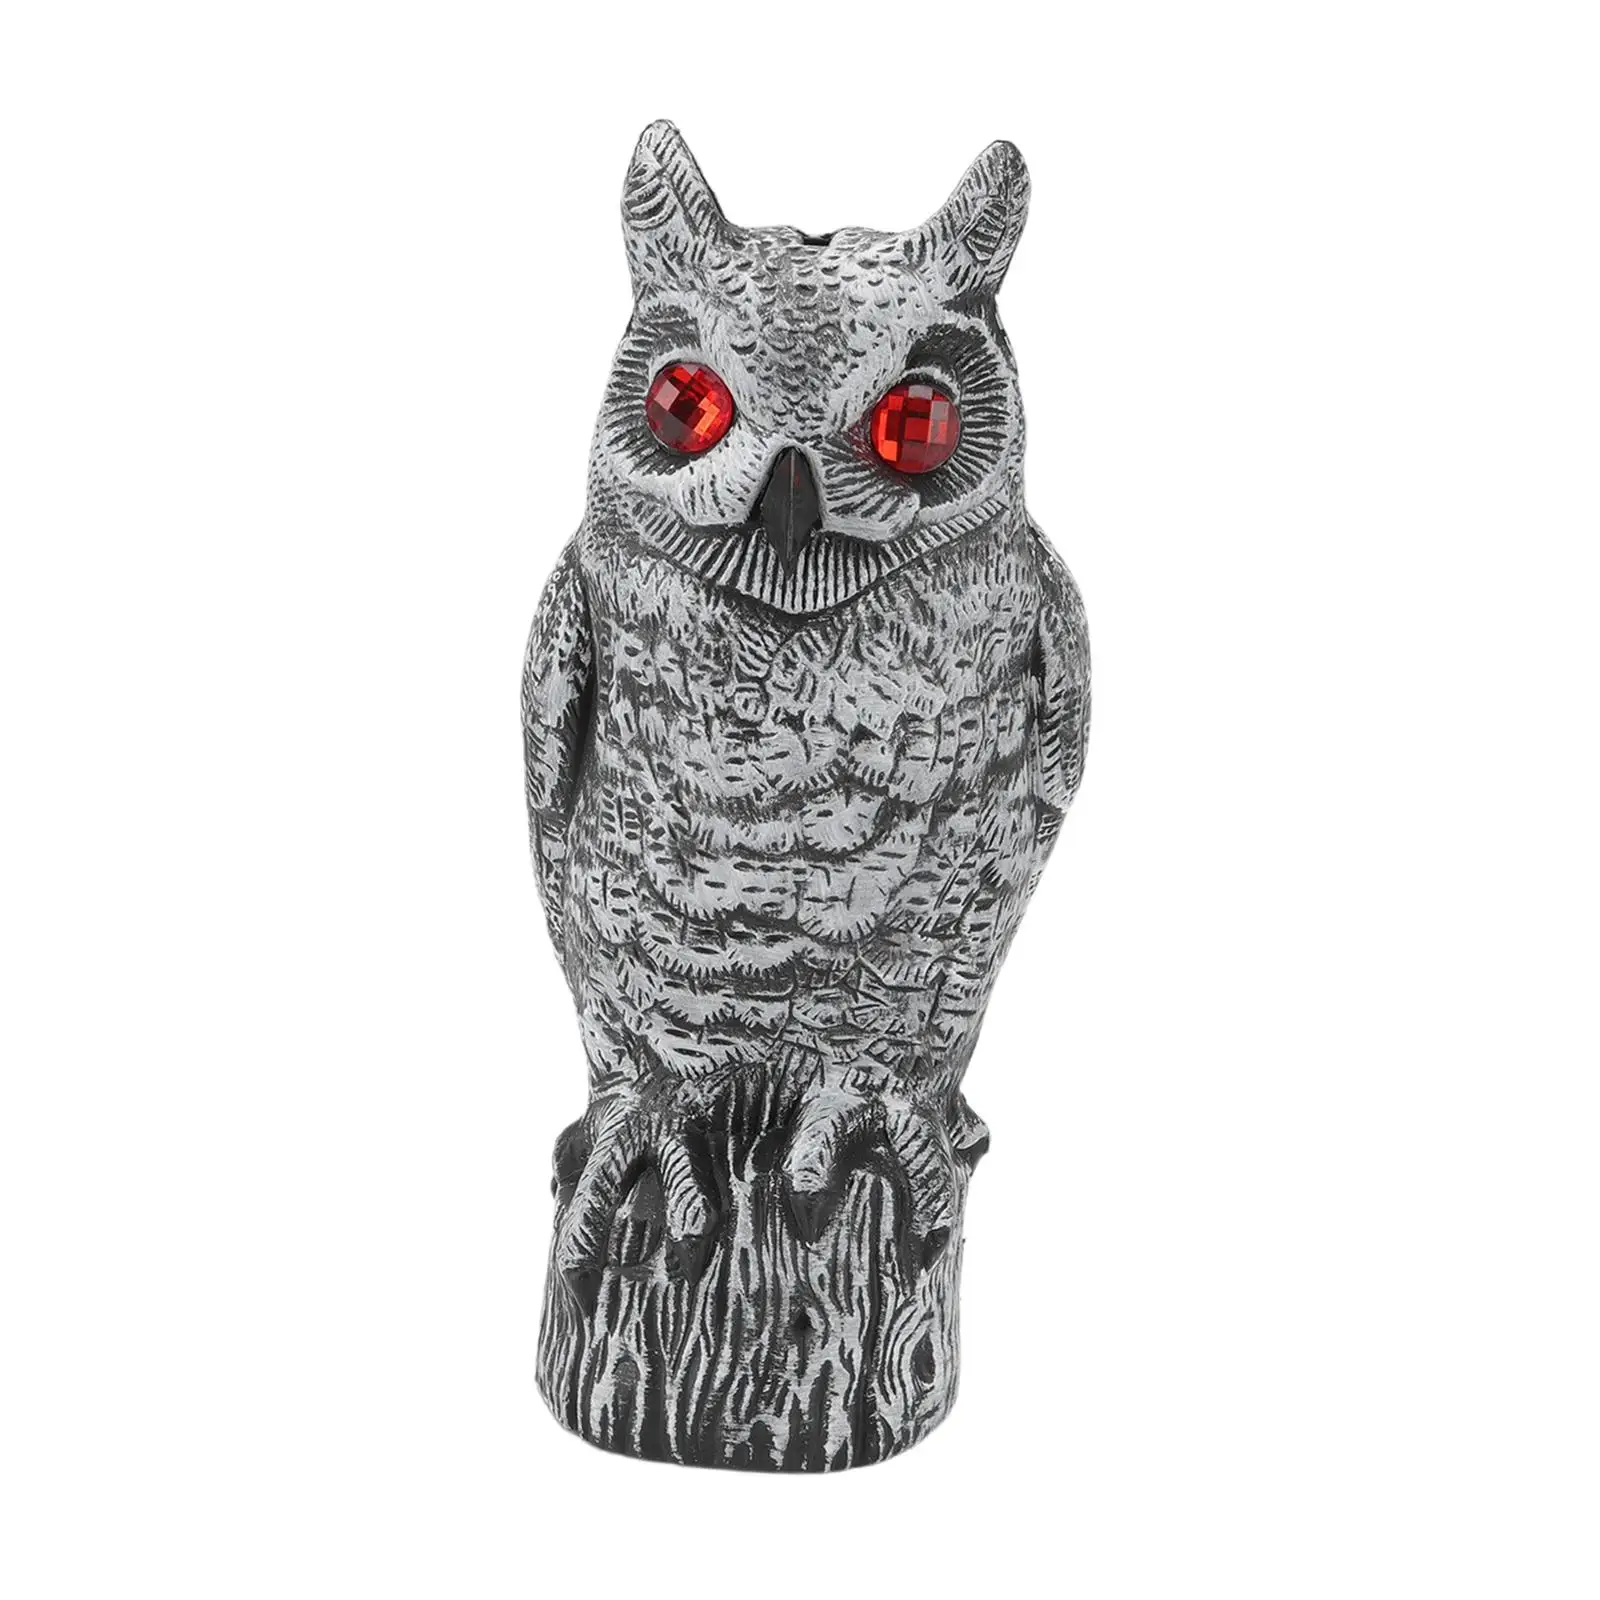 Fake Owl Bird Deterrent Scary Decor Sparrows Owl bird Deterrents Device Away Decoration for Home Vegetable